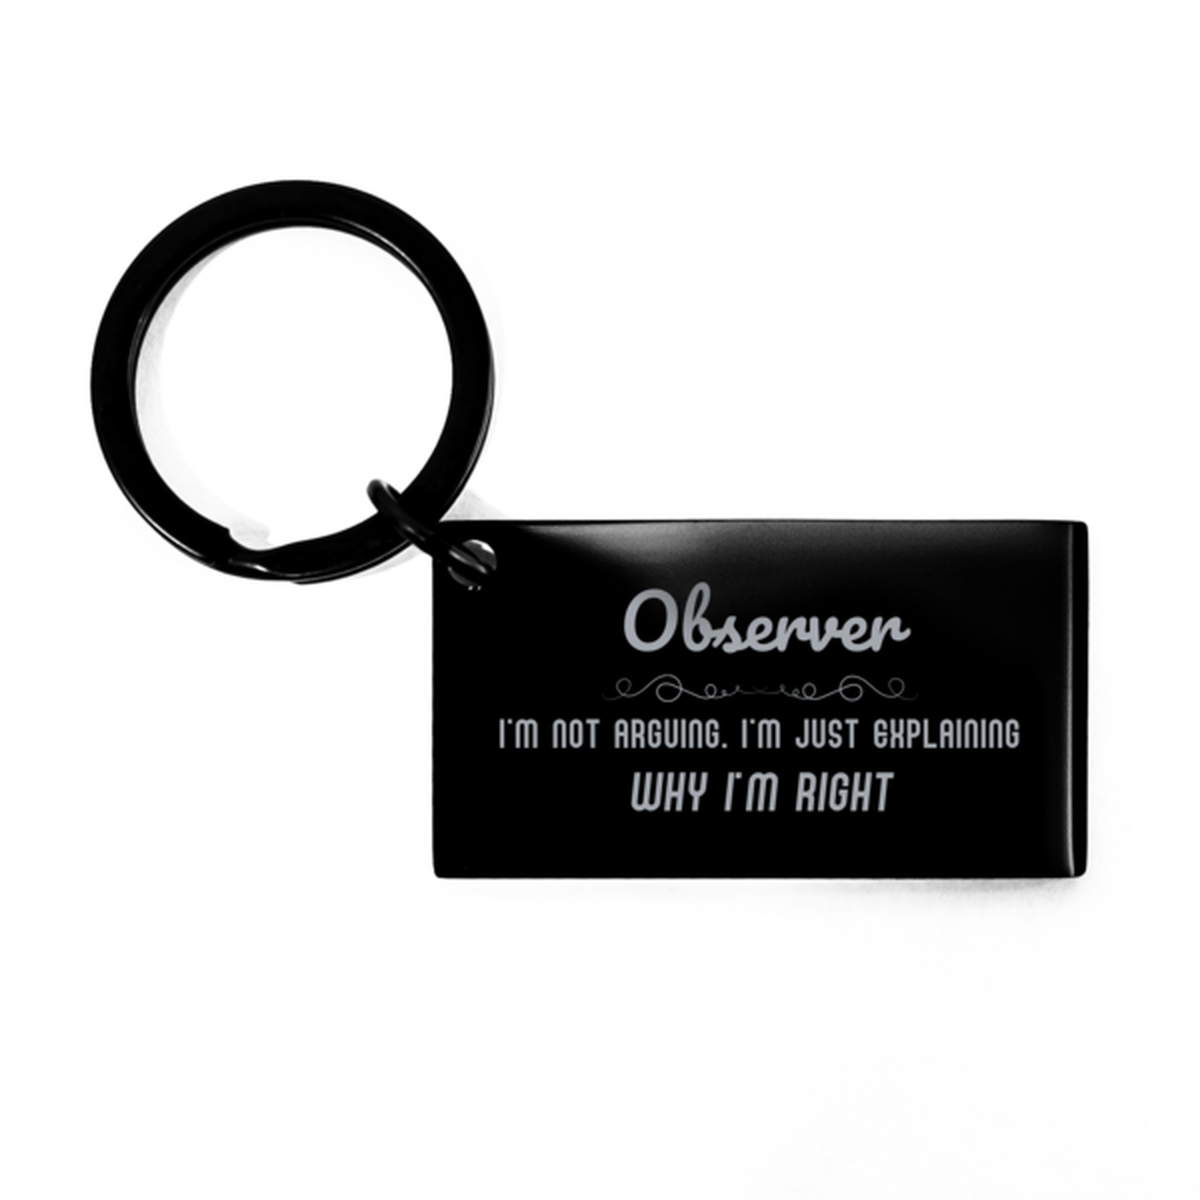 Observer I'm not Arguing. I'm Just Explaining Why I'm RIGHT Keychain, Funny Saying Quote Observer Gifts For Observer Graduation Birthday Christmas Gifts for Men Women Coworker